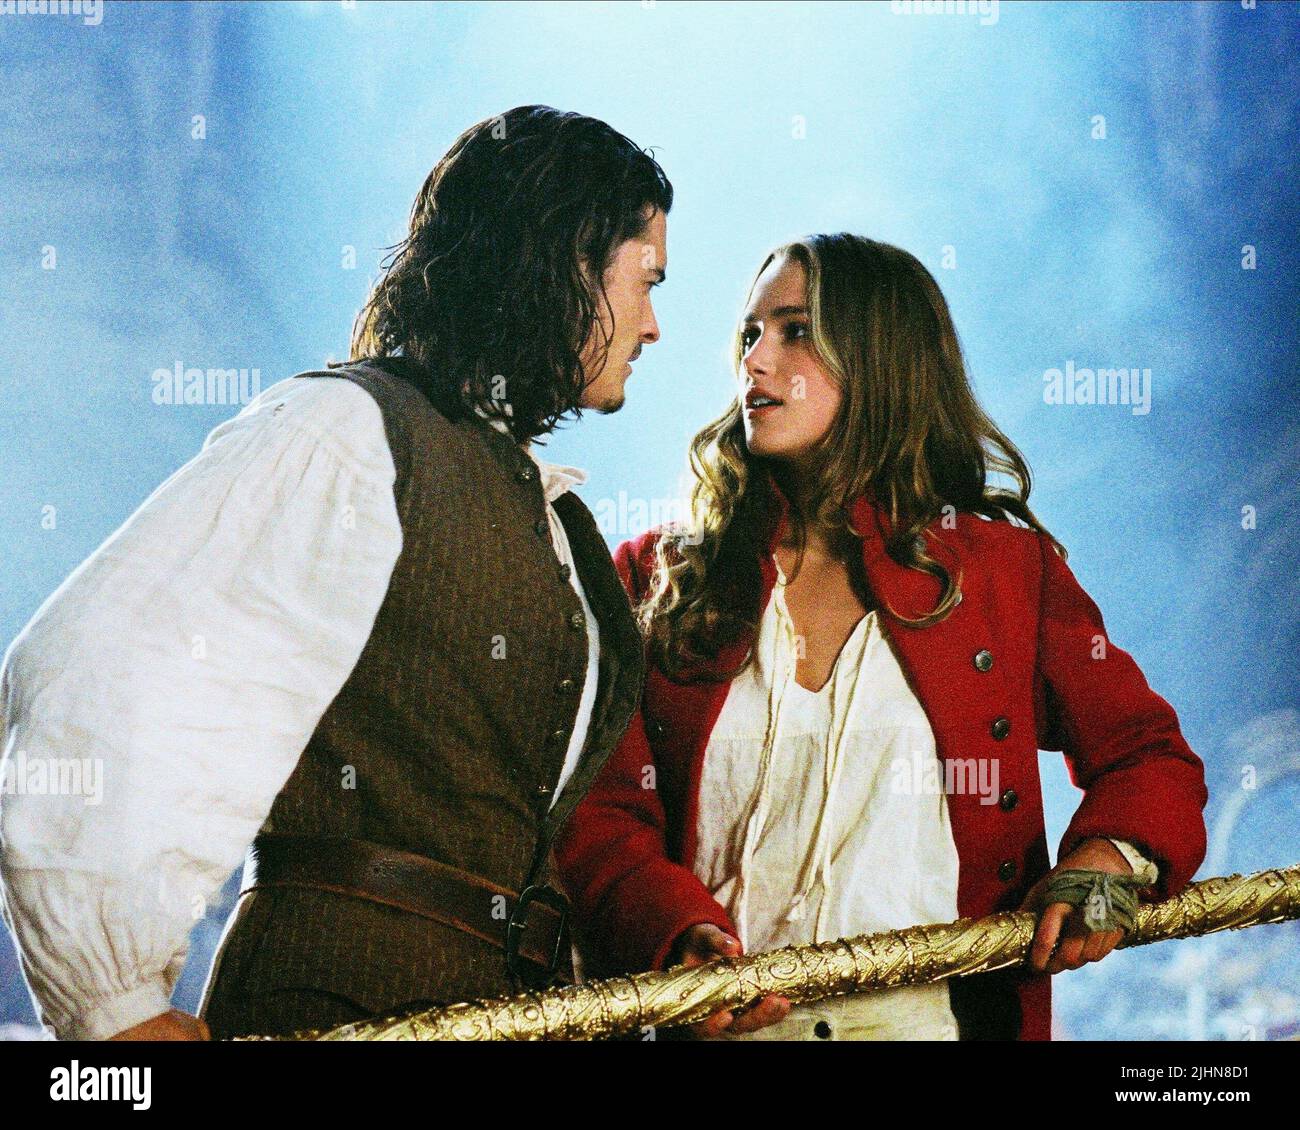 ORLANDO BLOOM, KEIRA KNIGHTLEY, PIRATES OF THE CARIBBEAN: THE CURSE OF THE BLACK PEARL, 2003 Stock Photo